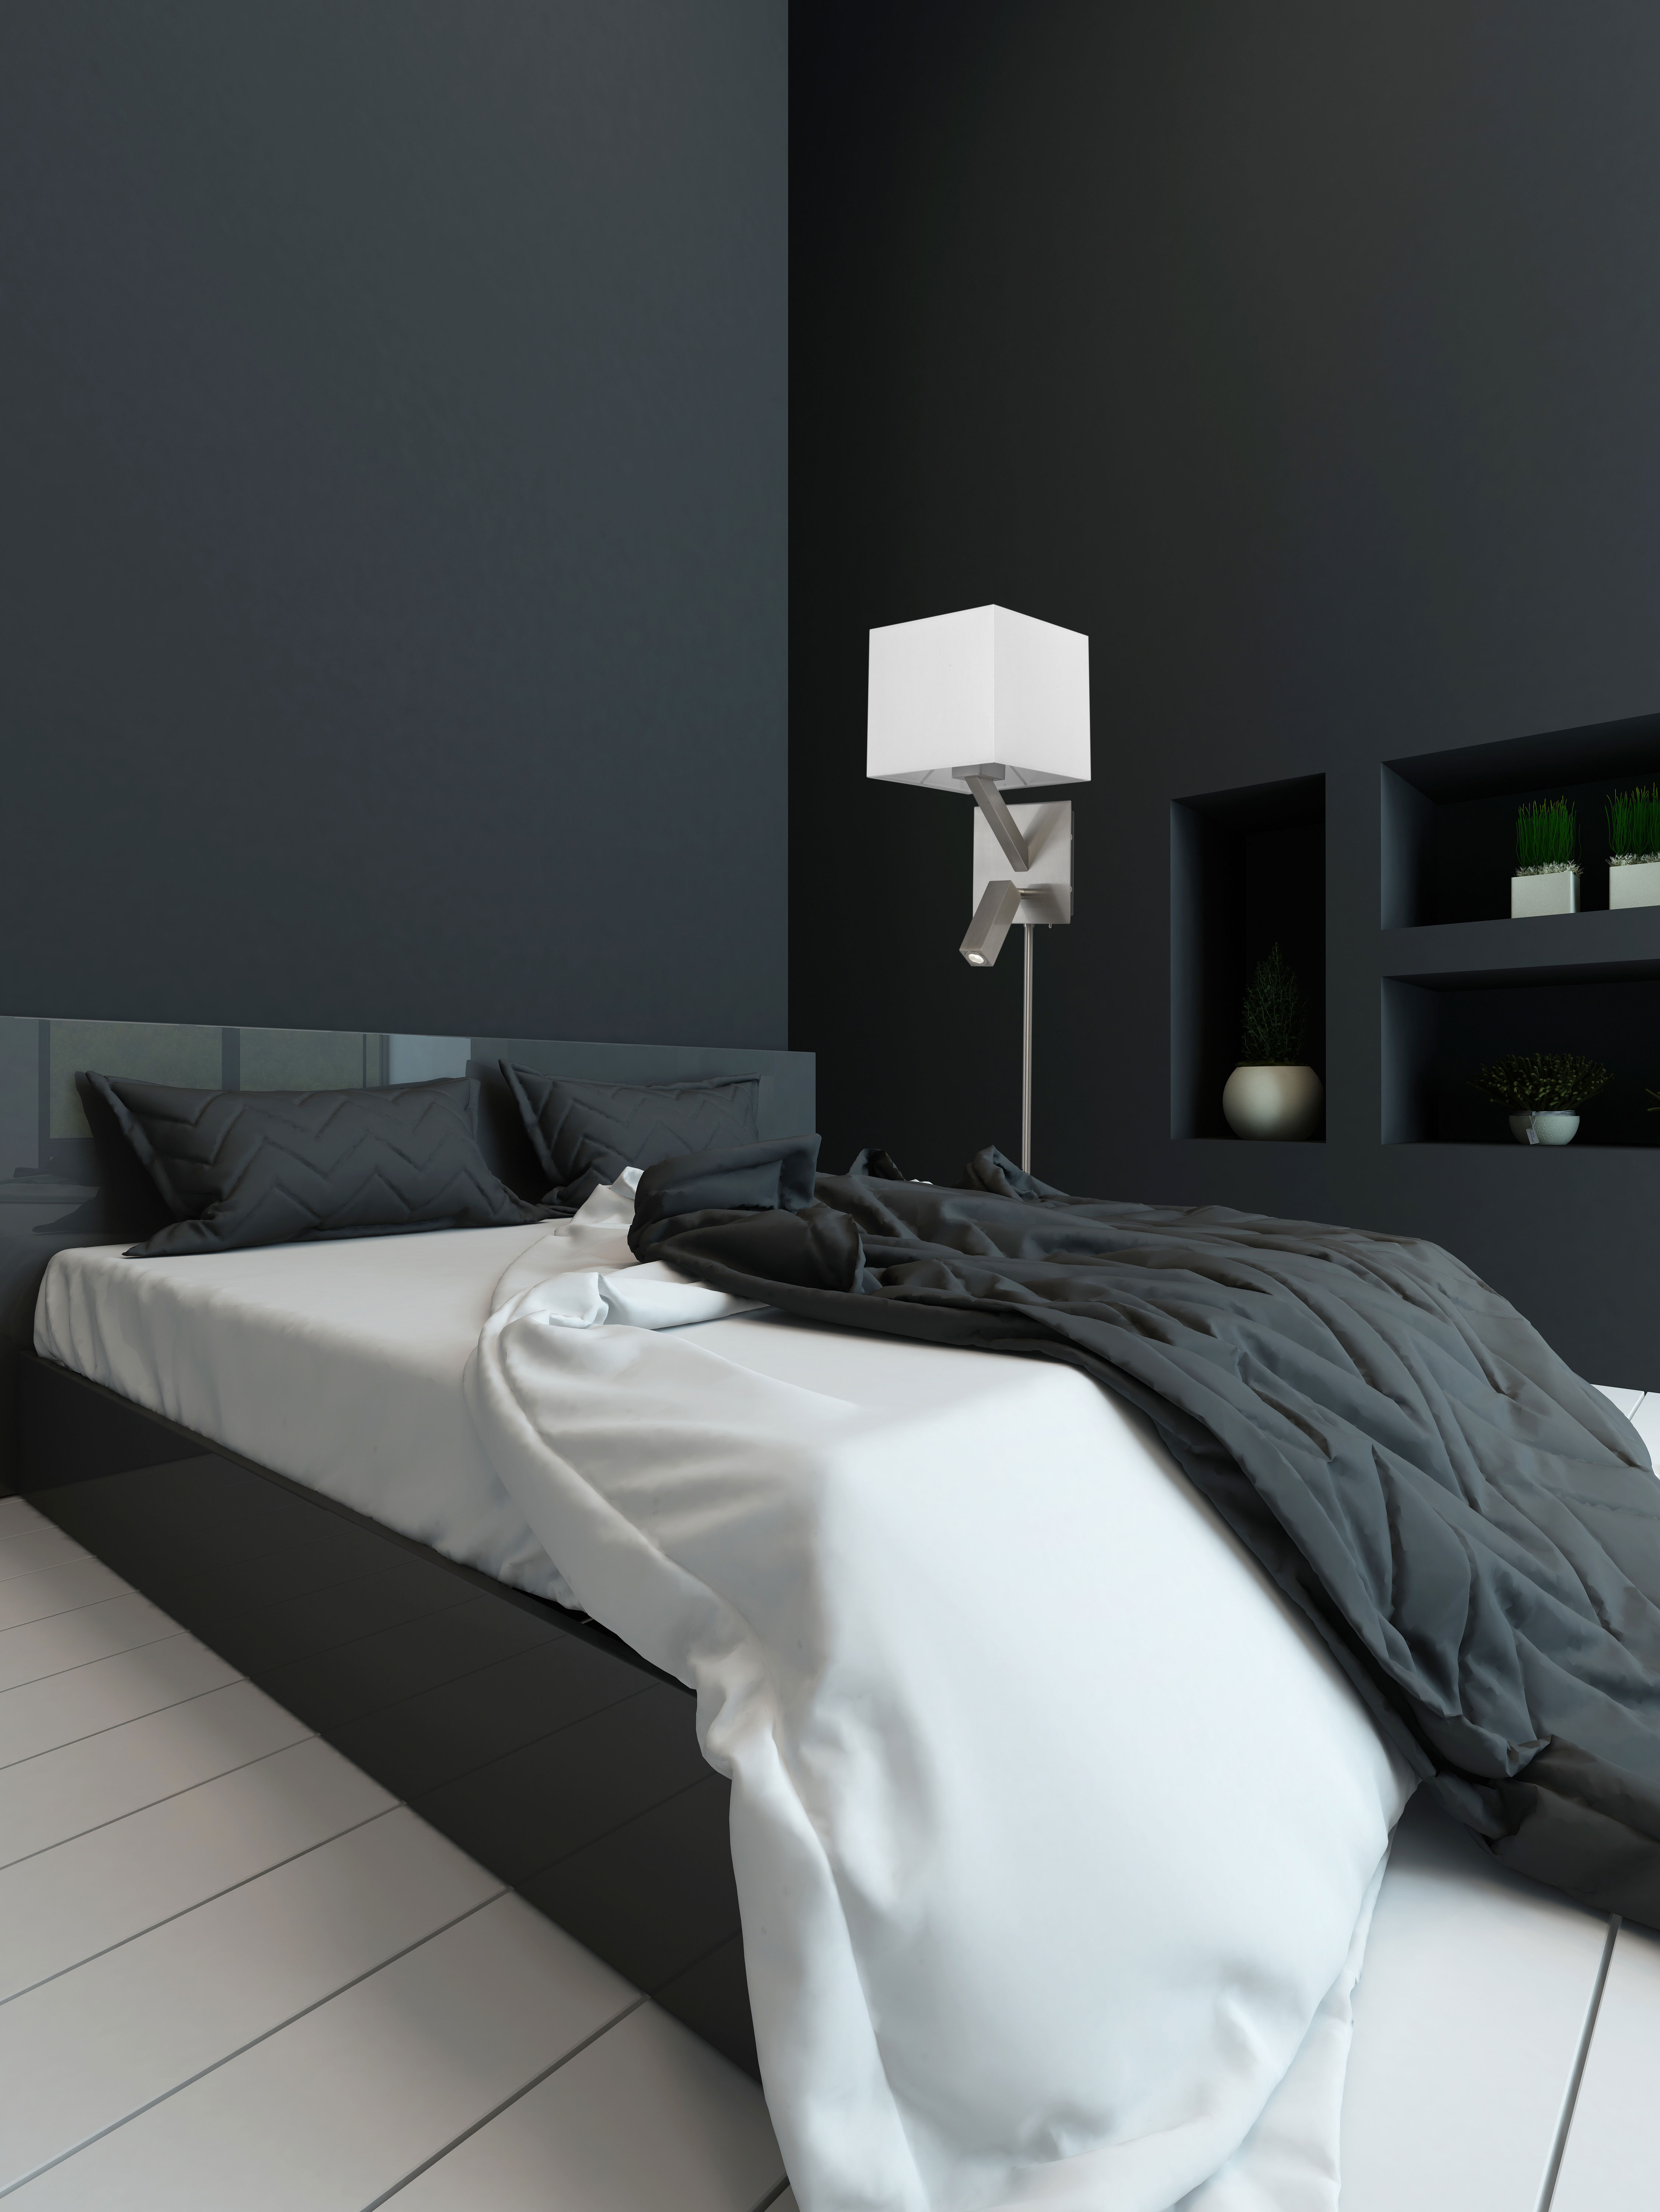 Wall Sconce Lighting / lecture Modern Dainolite DLED496-OBB in a dark bedroom with black walls and white linens